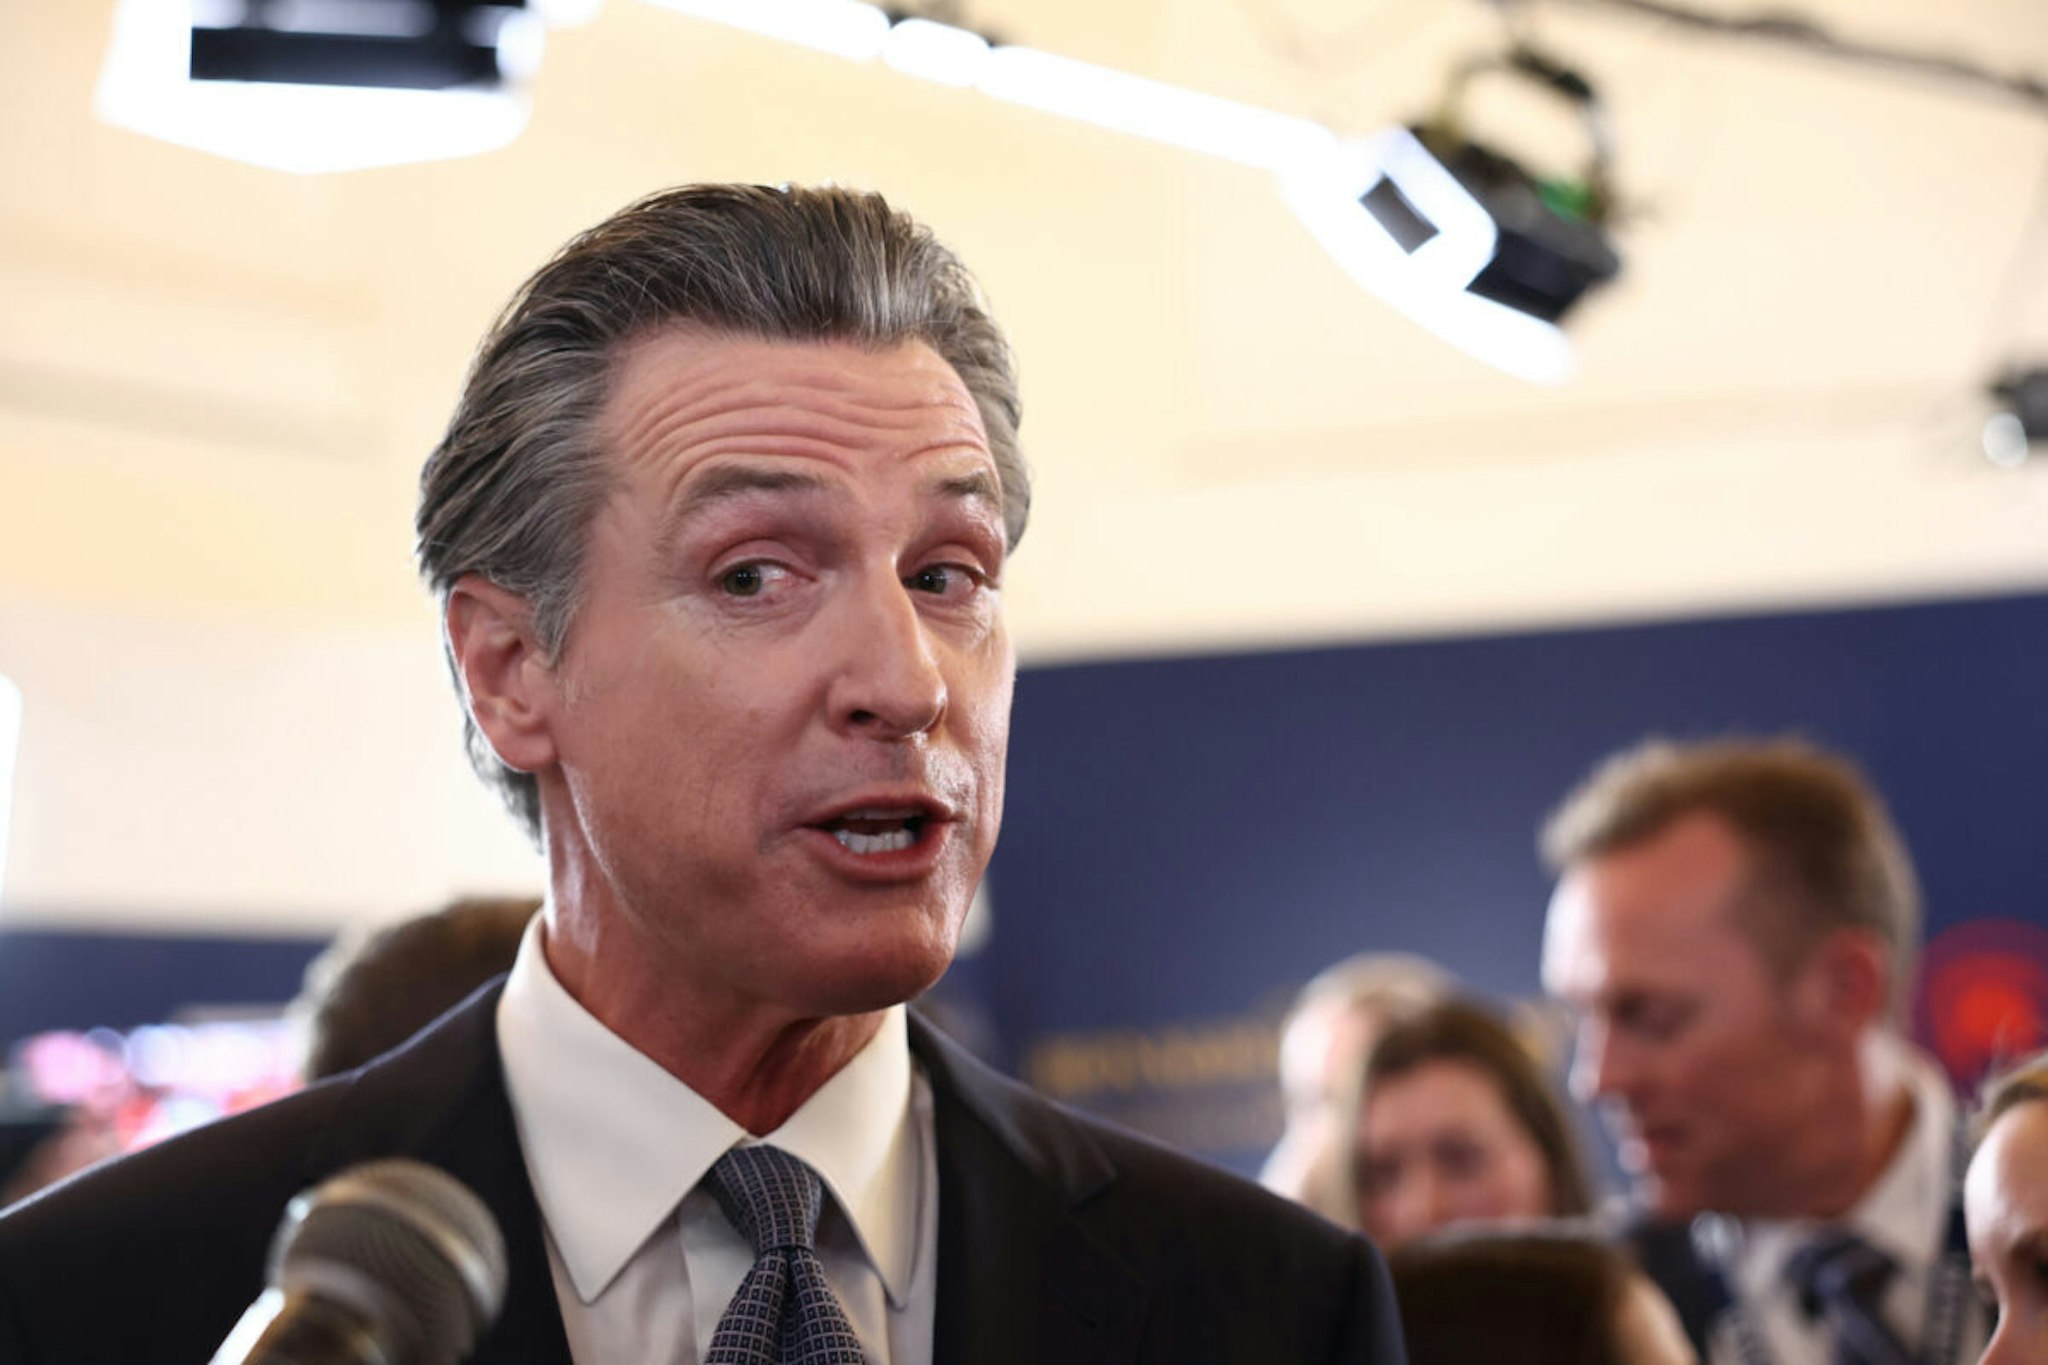 California Gov. Gavin Newsom talks to reporters in the spin room following the FOX Business Republican Primary Debate at the Ronald Reagan Presidential Library on September 27, 2023 in Simi Valley, California.